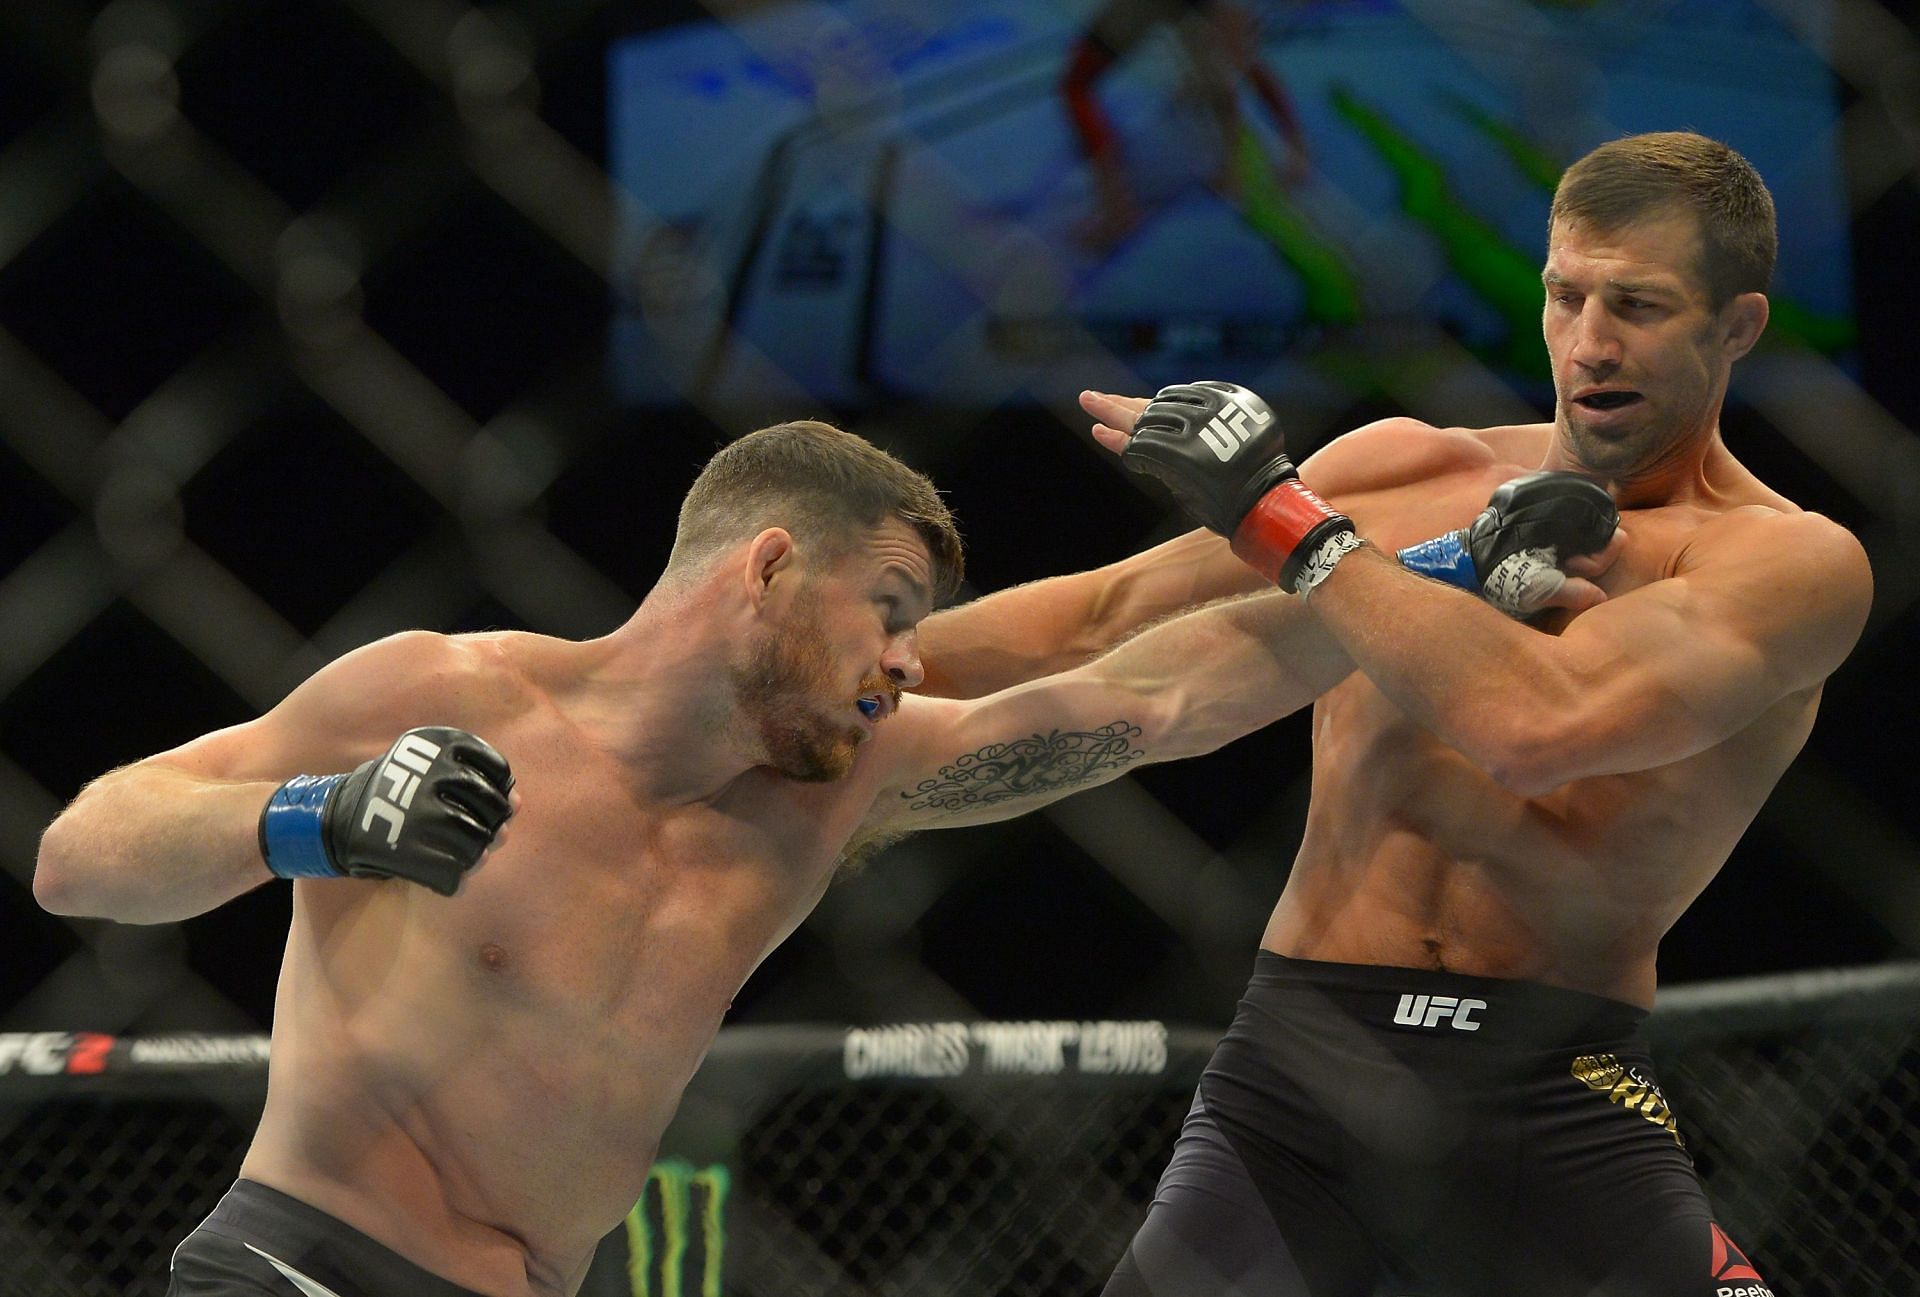 Bisping and Luke Rockhold fought for the title at UFC 199